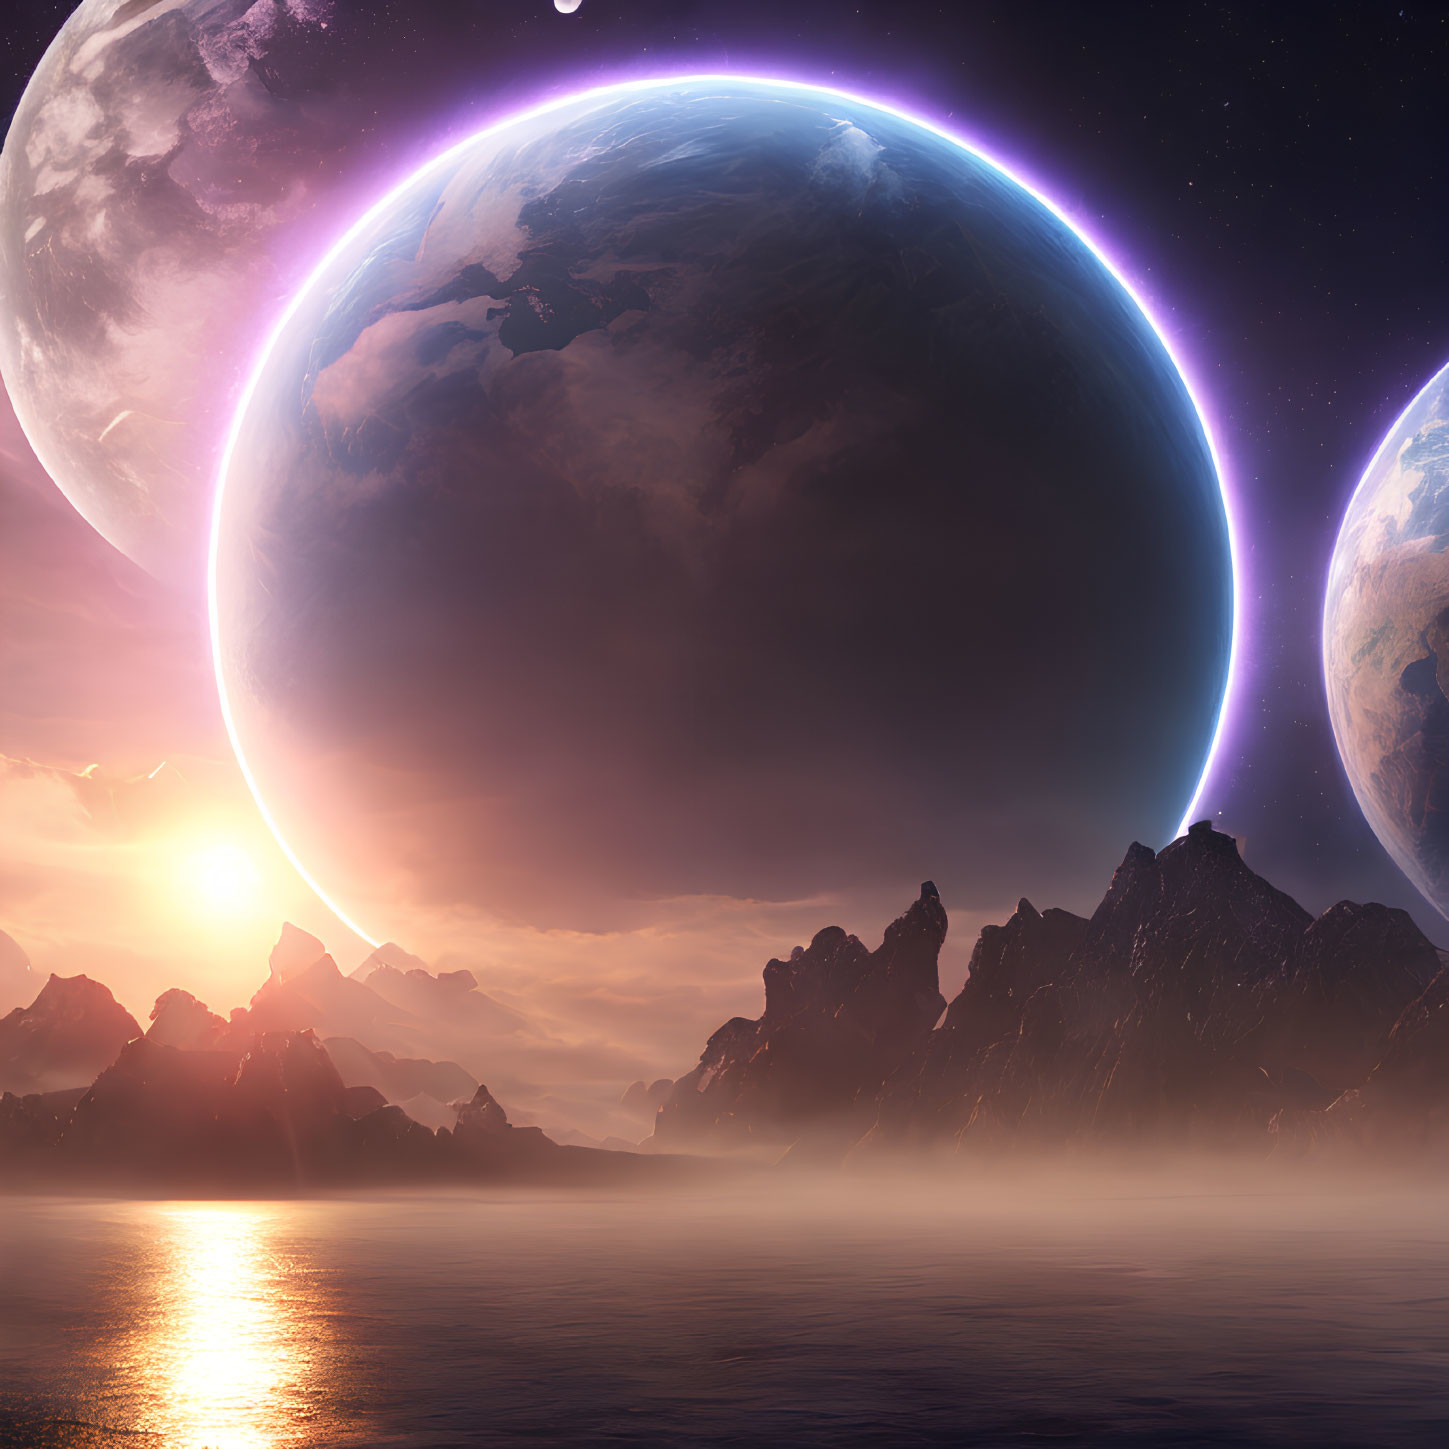 Surreal landscape with ocean, mountains, and celestial bodies